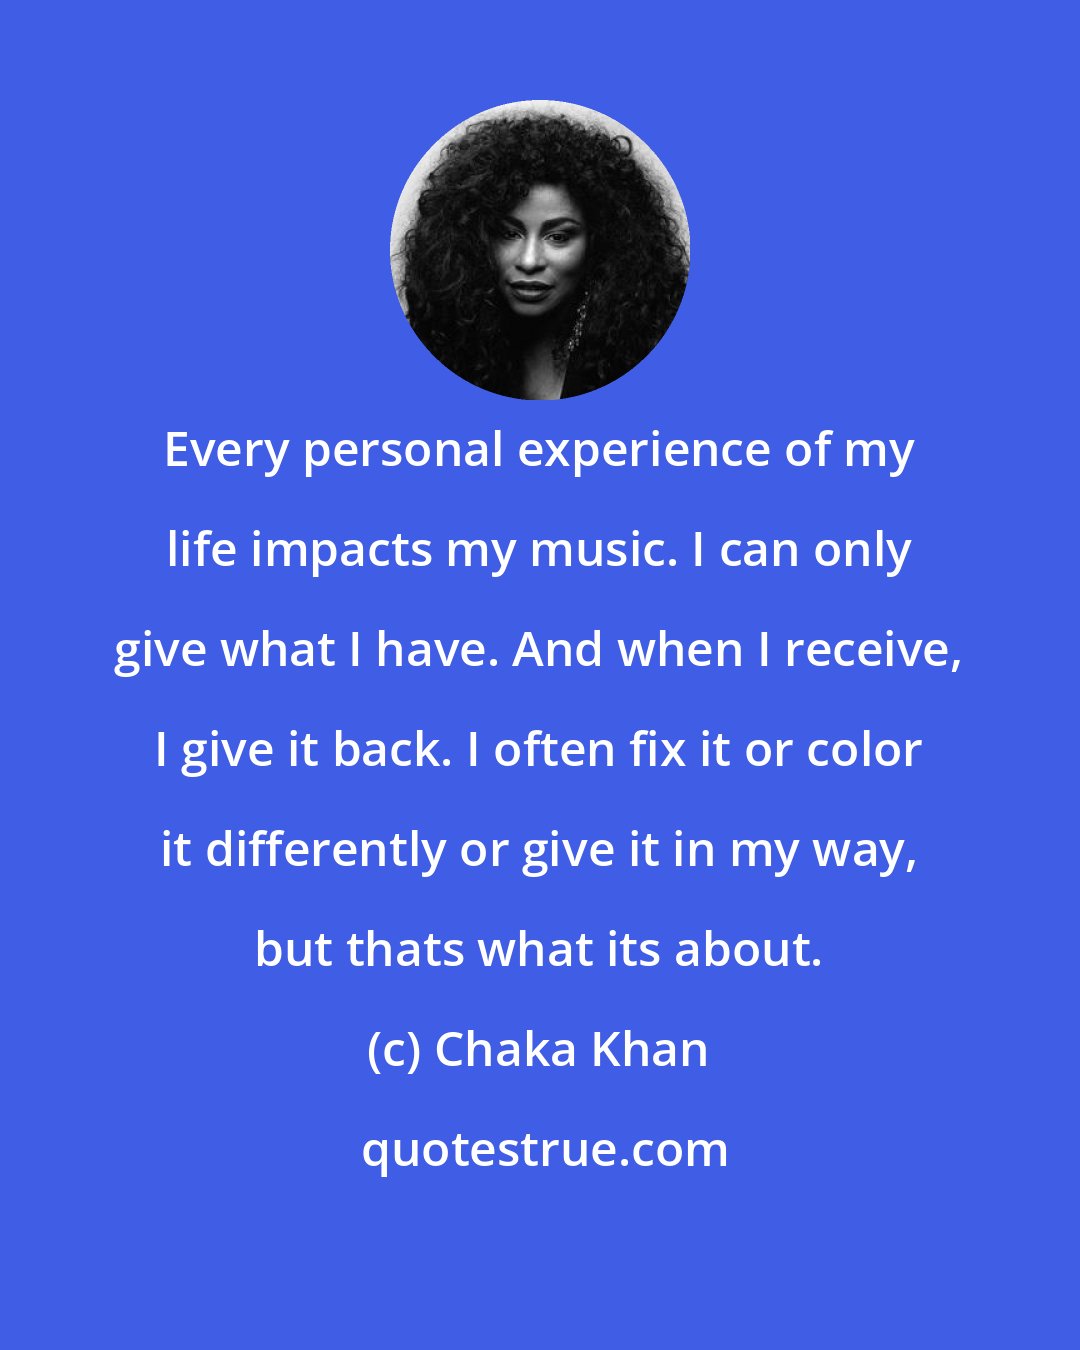 Chaka Khan: Every personal experience of my life impacts my music. I can only give what I have. And when I receive, I give it back. I often fix it or color it differently or give it in my way, but thats what its about.